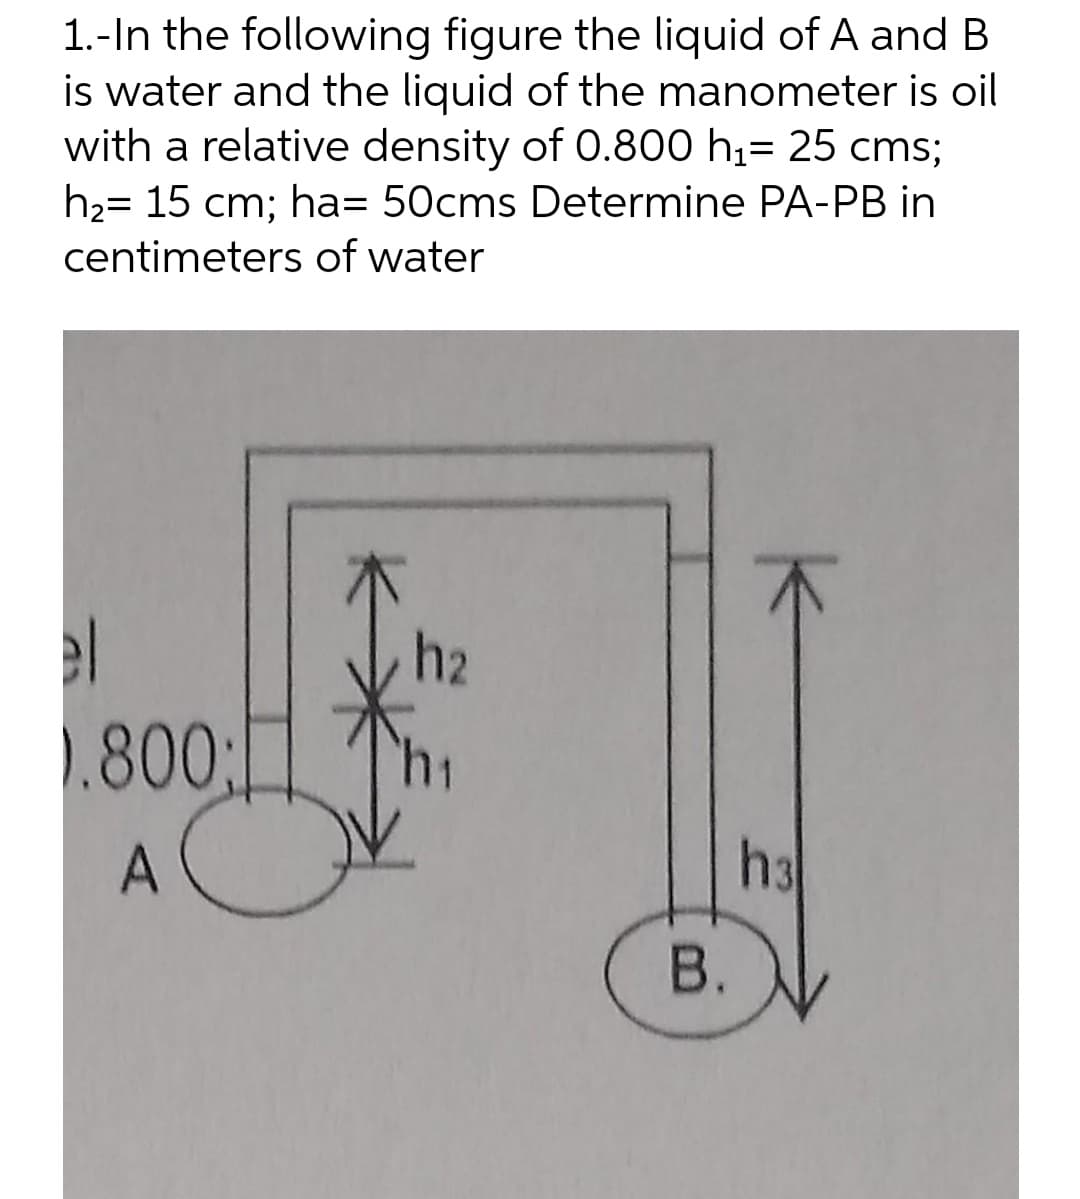 1.- In the following figure the liquid of A and B
is water and the liquid of the manometer is oil
with a relative density of 0.800 h₁= 25 cms;
h₂= 15 cm; ha= 50cms Determine PA-PB in
centimeters of water
el
h2
h3
.800;
A
B.